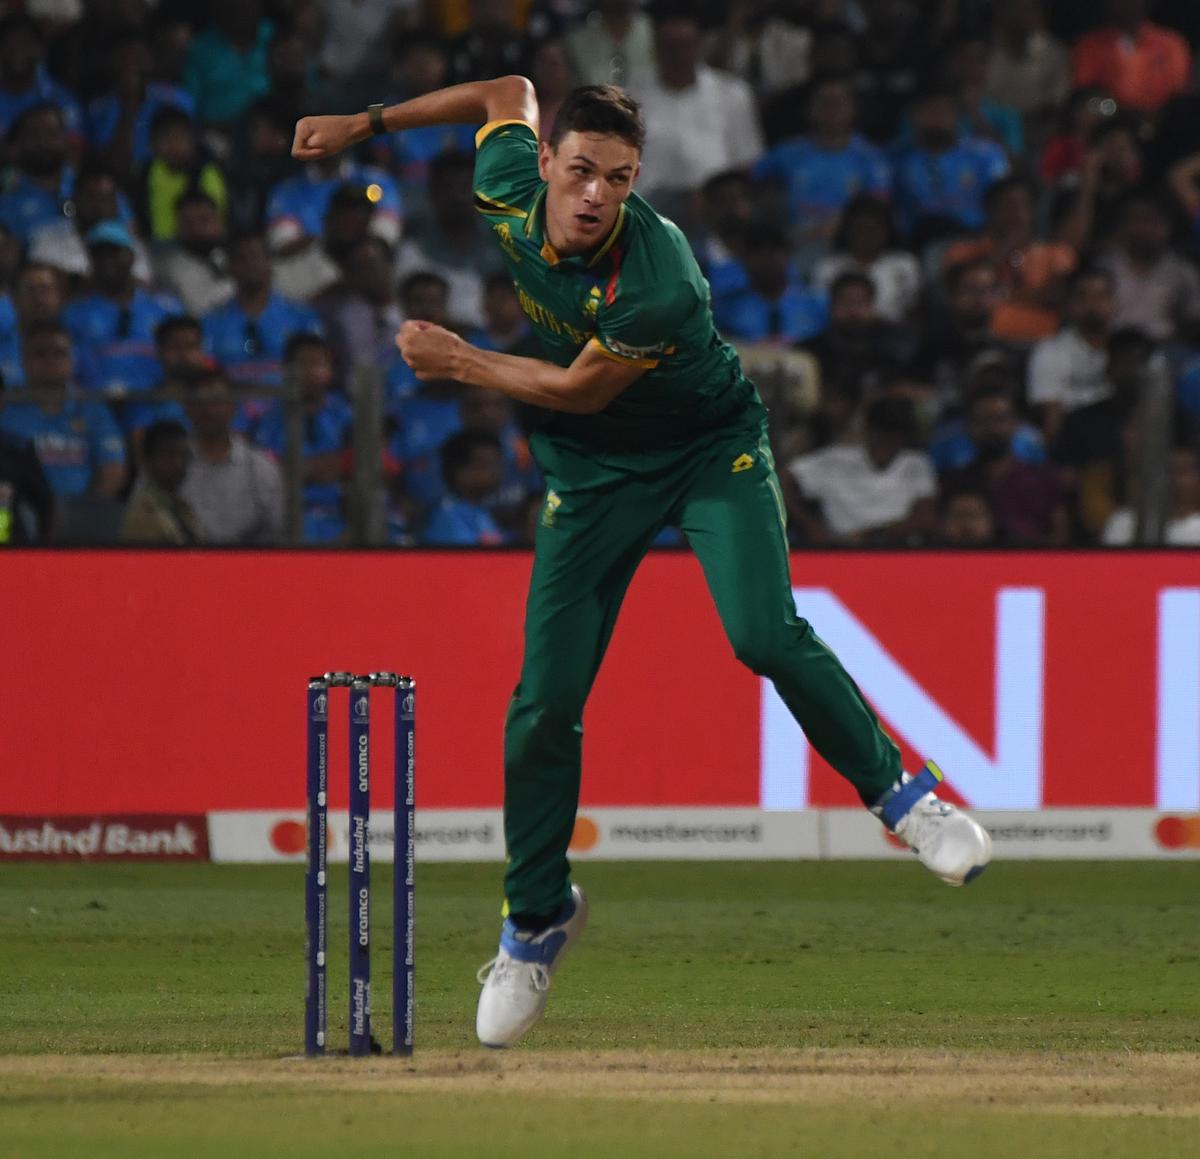 Jansen picked up the highest number of wickets (12) in the PowerPlay in the tournament.